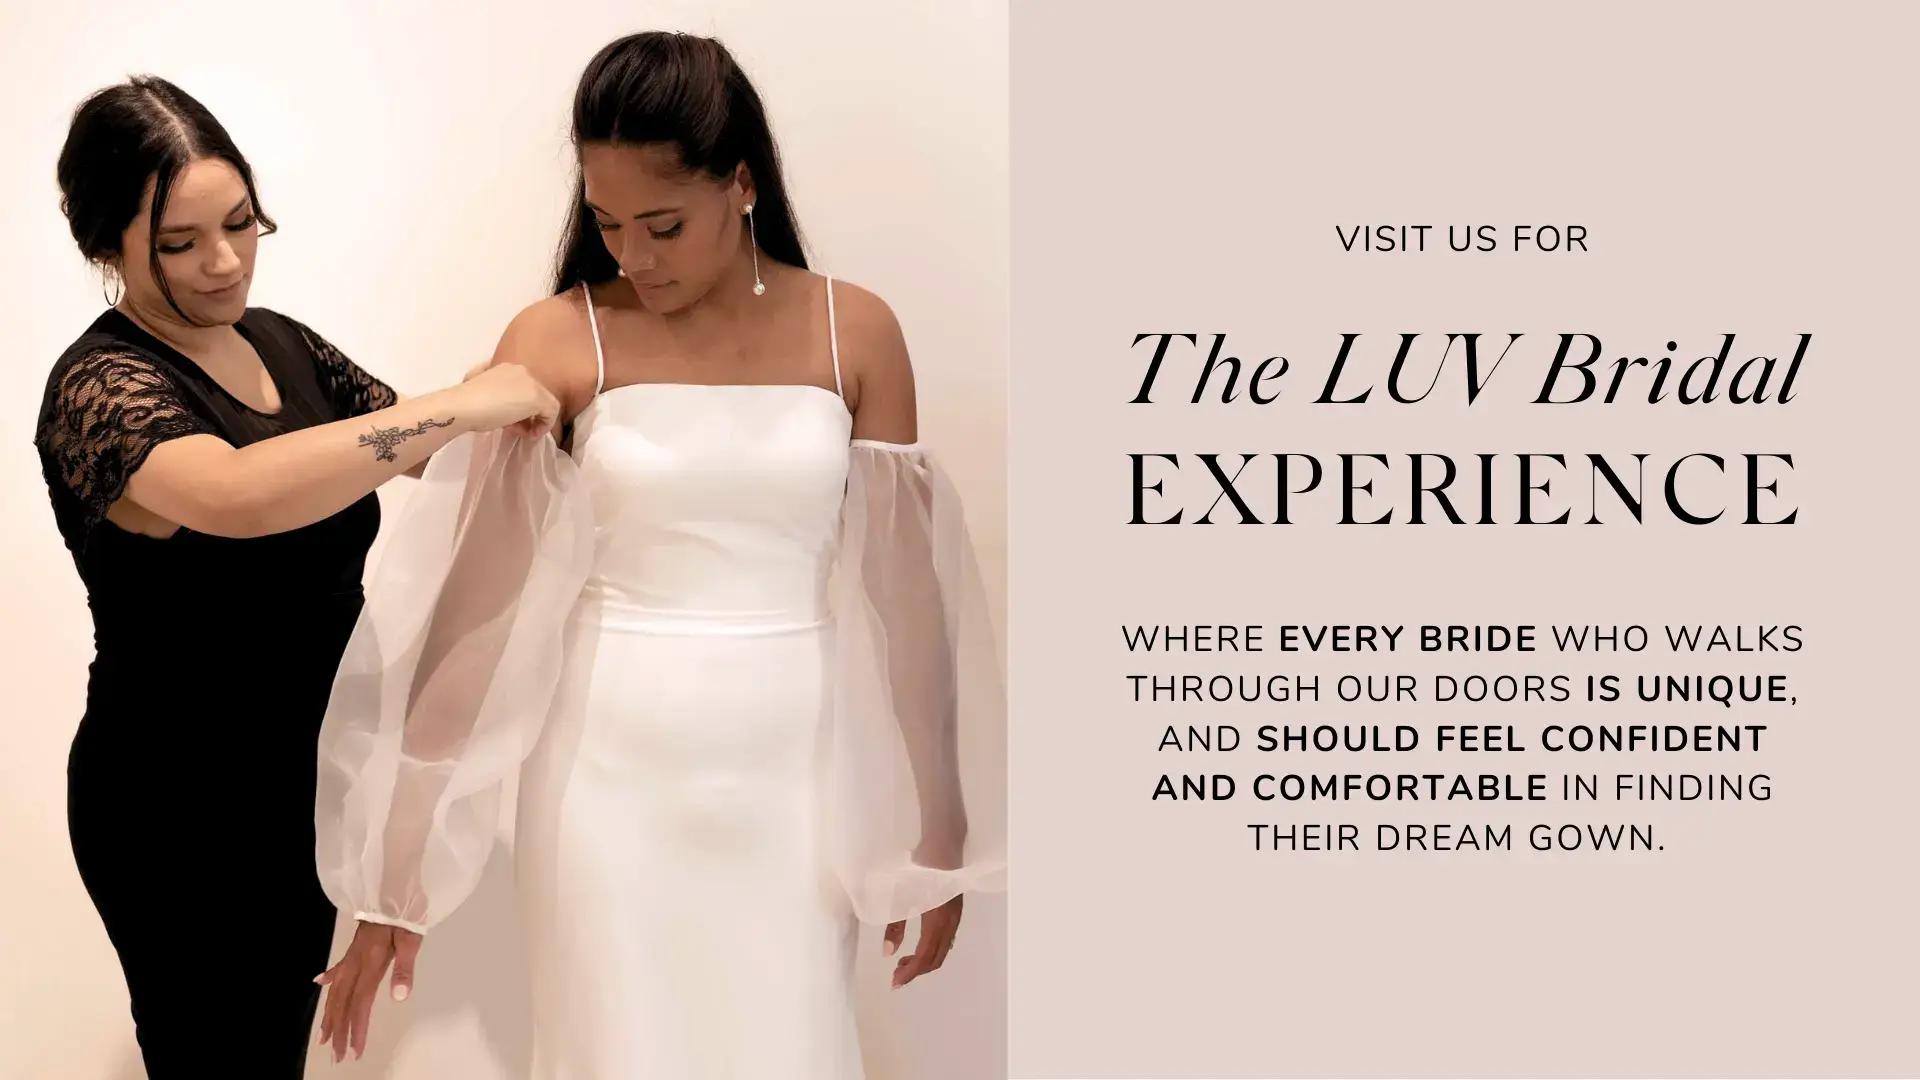 The Luv Bridal Experience